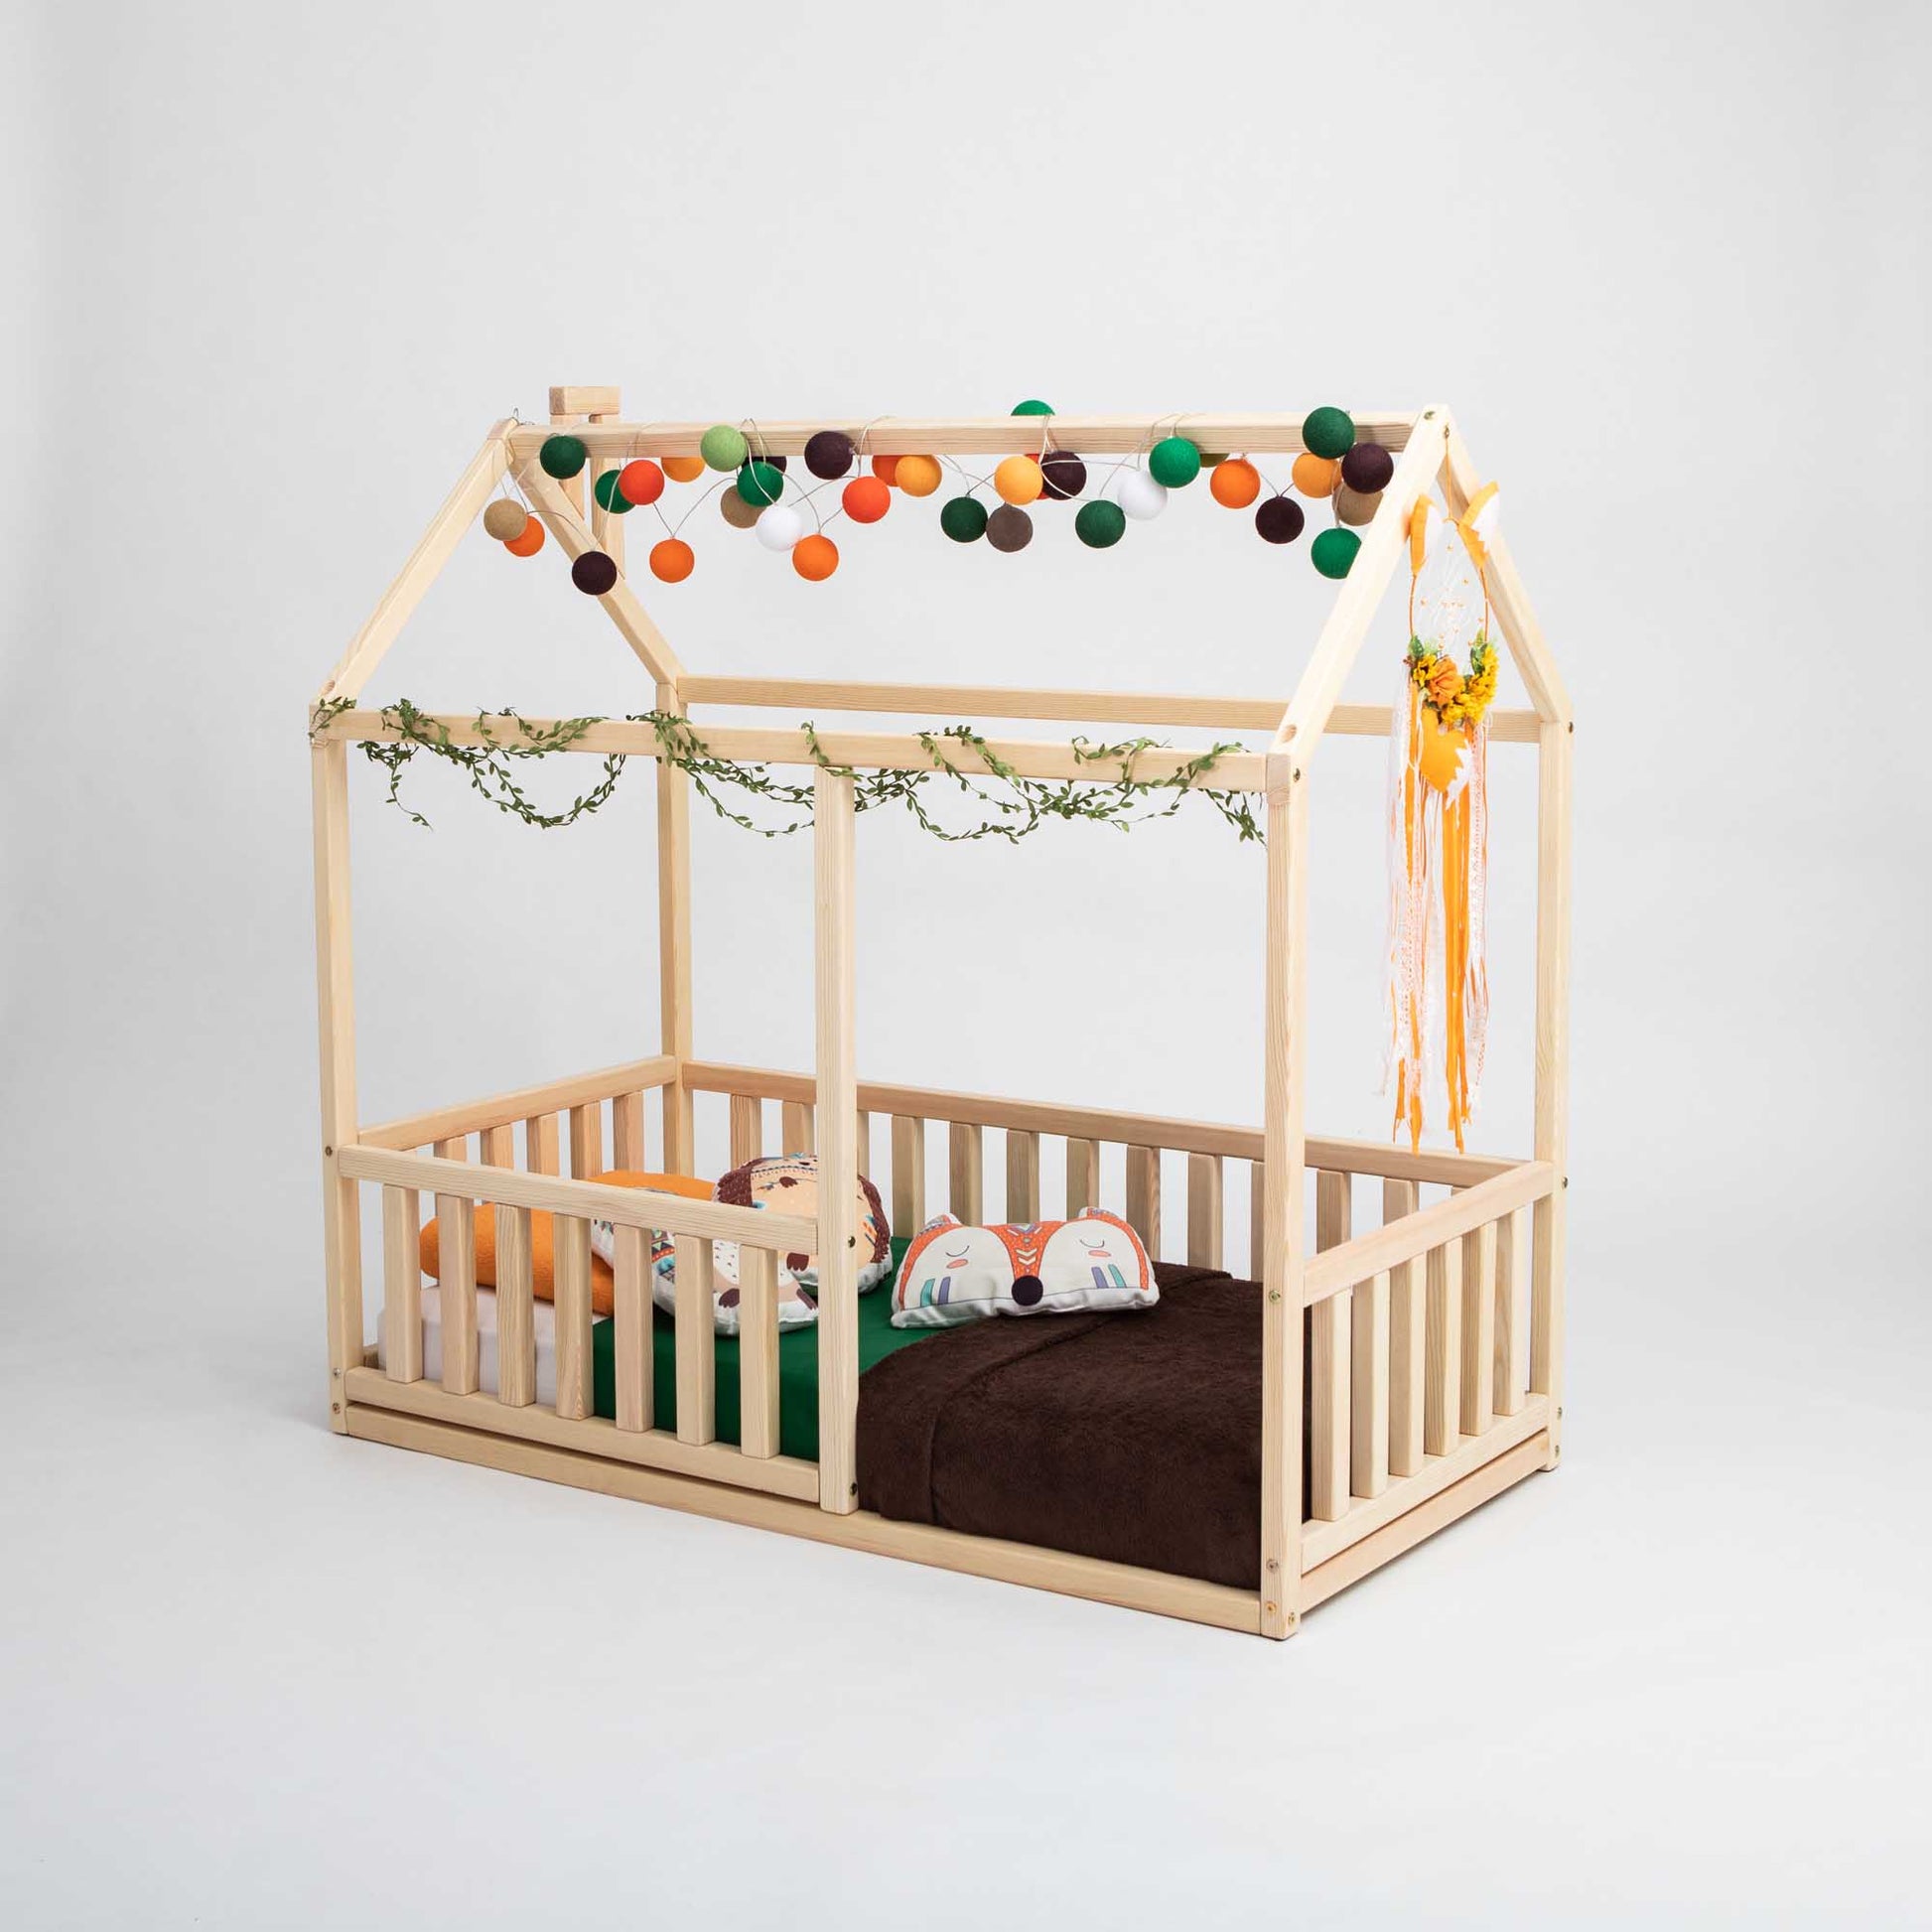 A cozy sleep haven for children, this Sweet Home From Wood Montessori floor house bed with rails features wooden construction with vertical rail fences and charming bunting and pom poms.